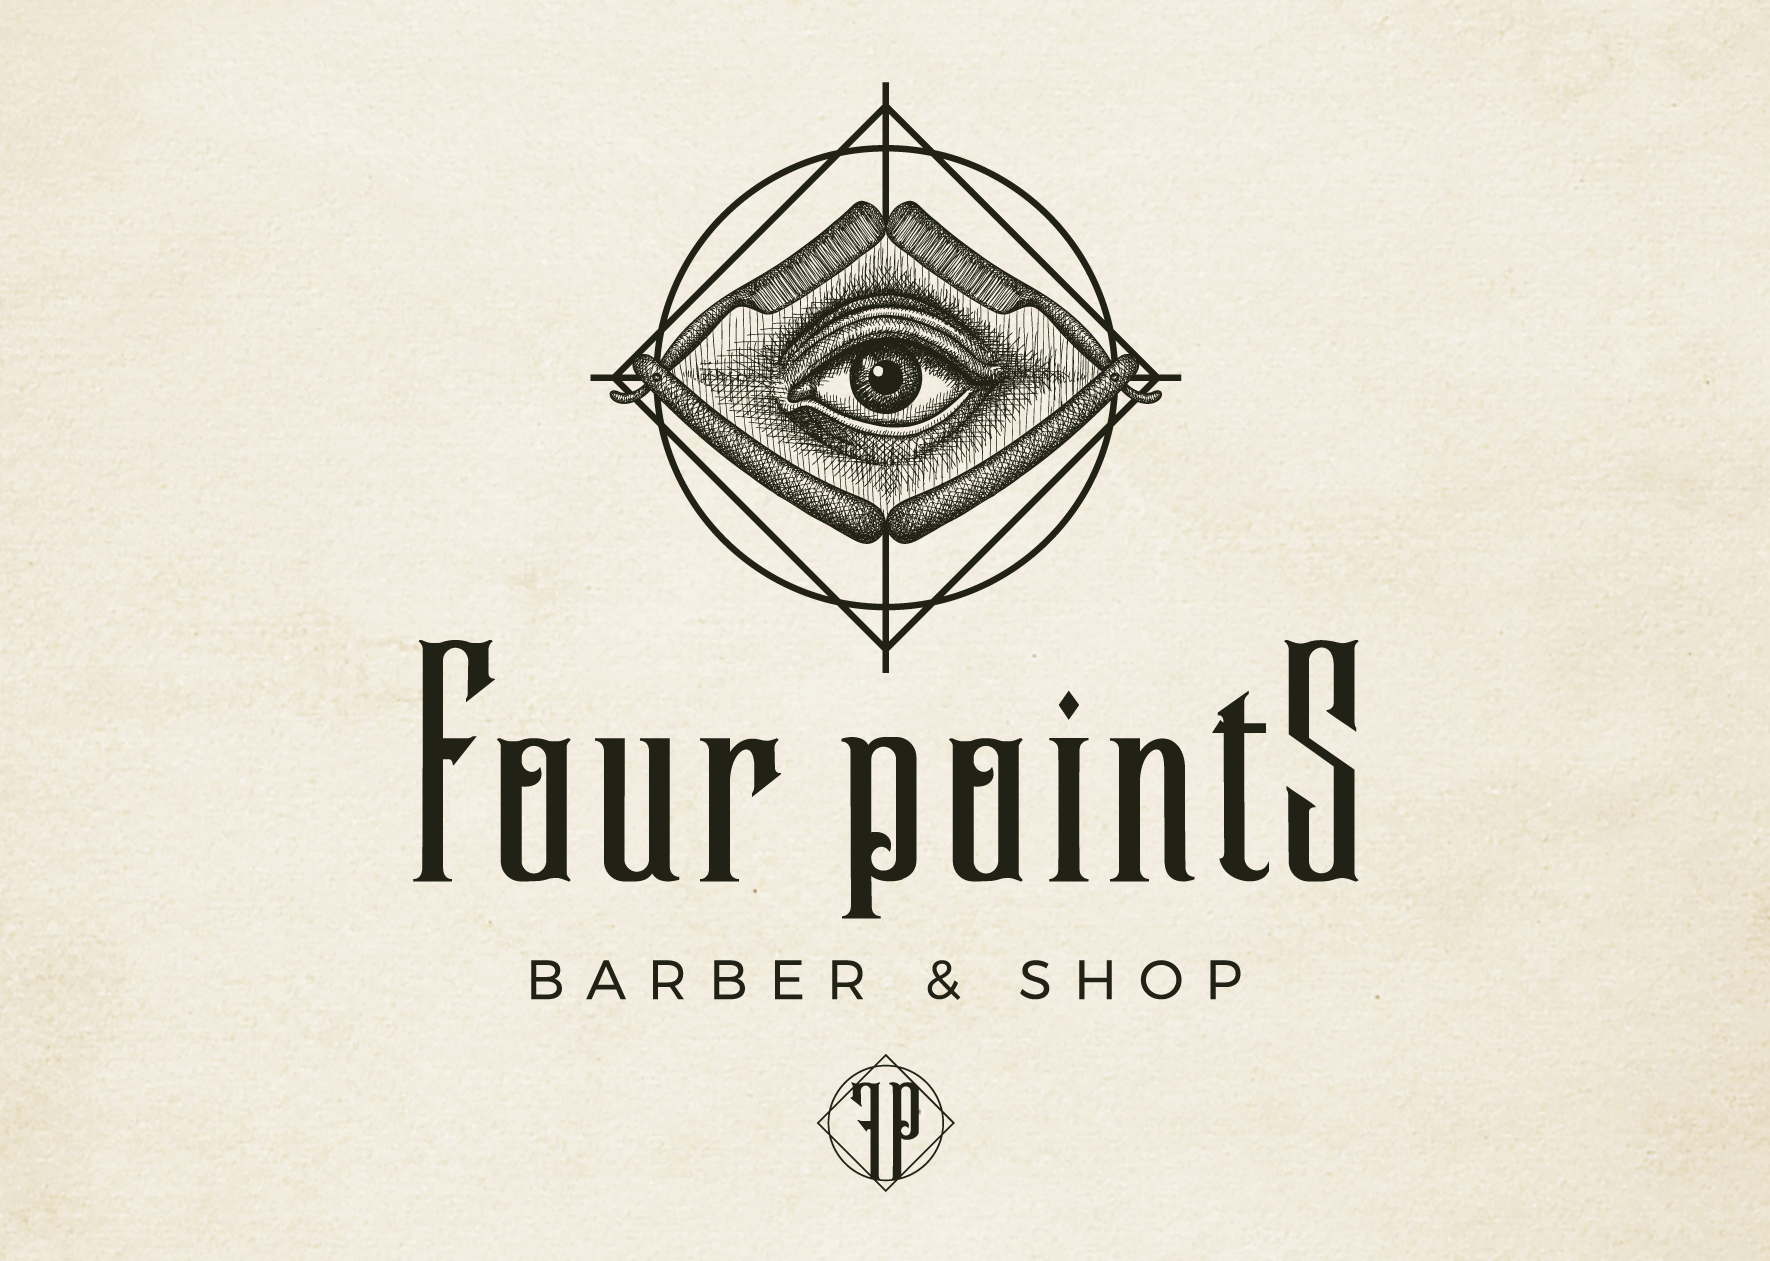 Sketch Style Barber Shop Logo Showing An All-Seeing-Eye